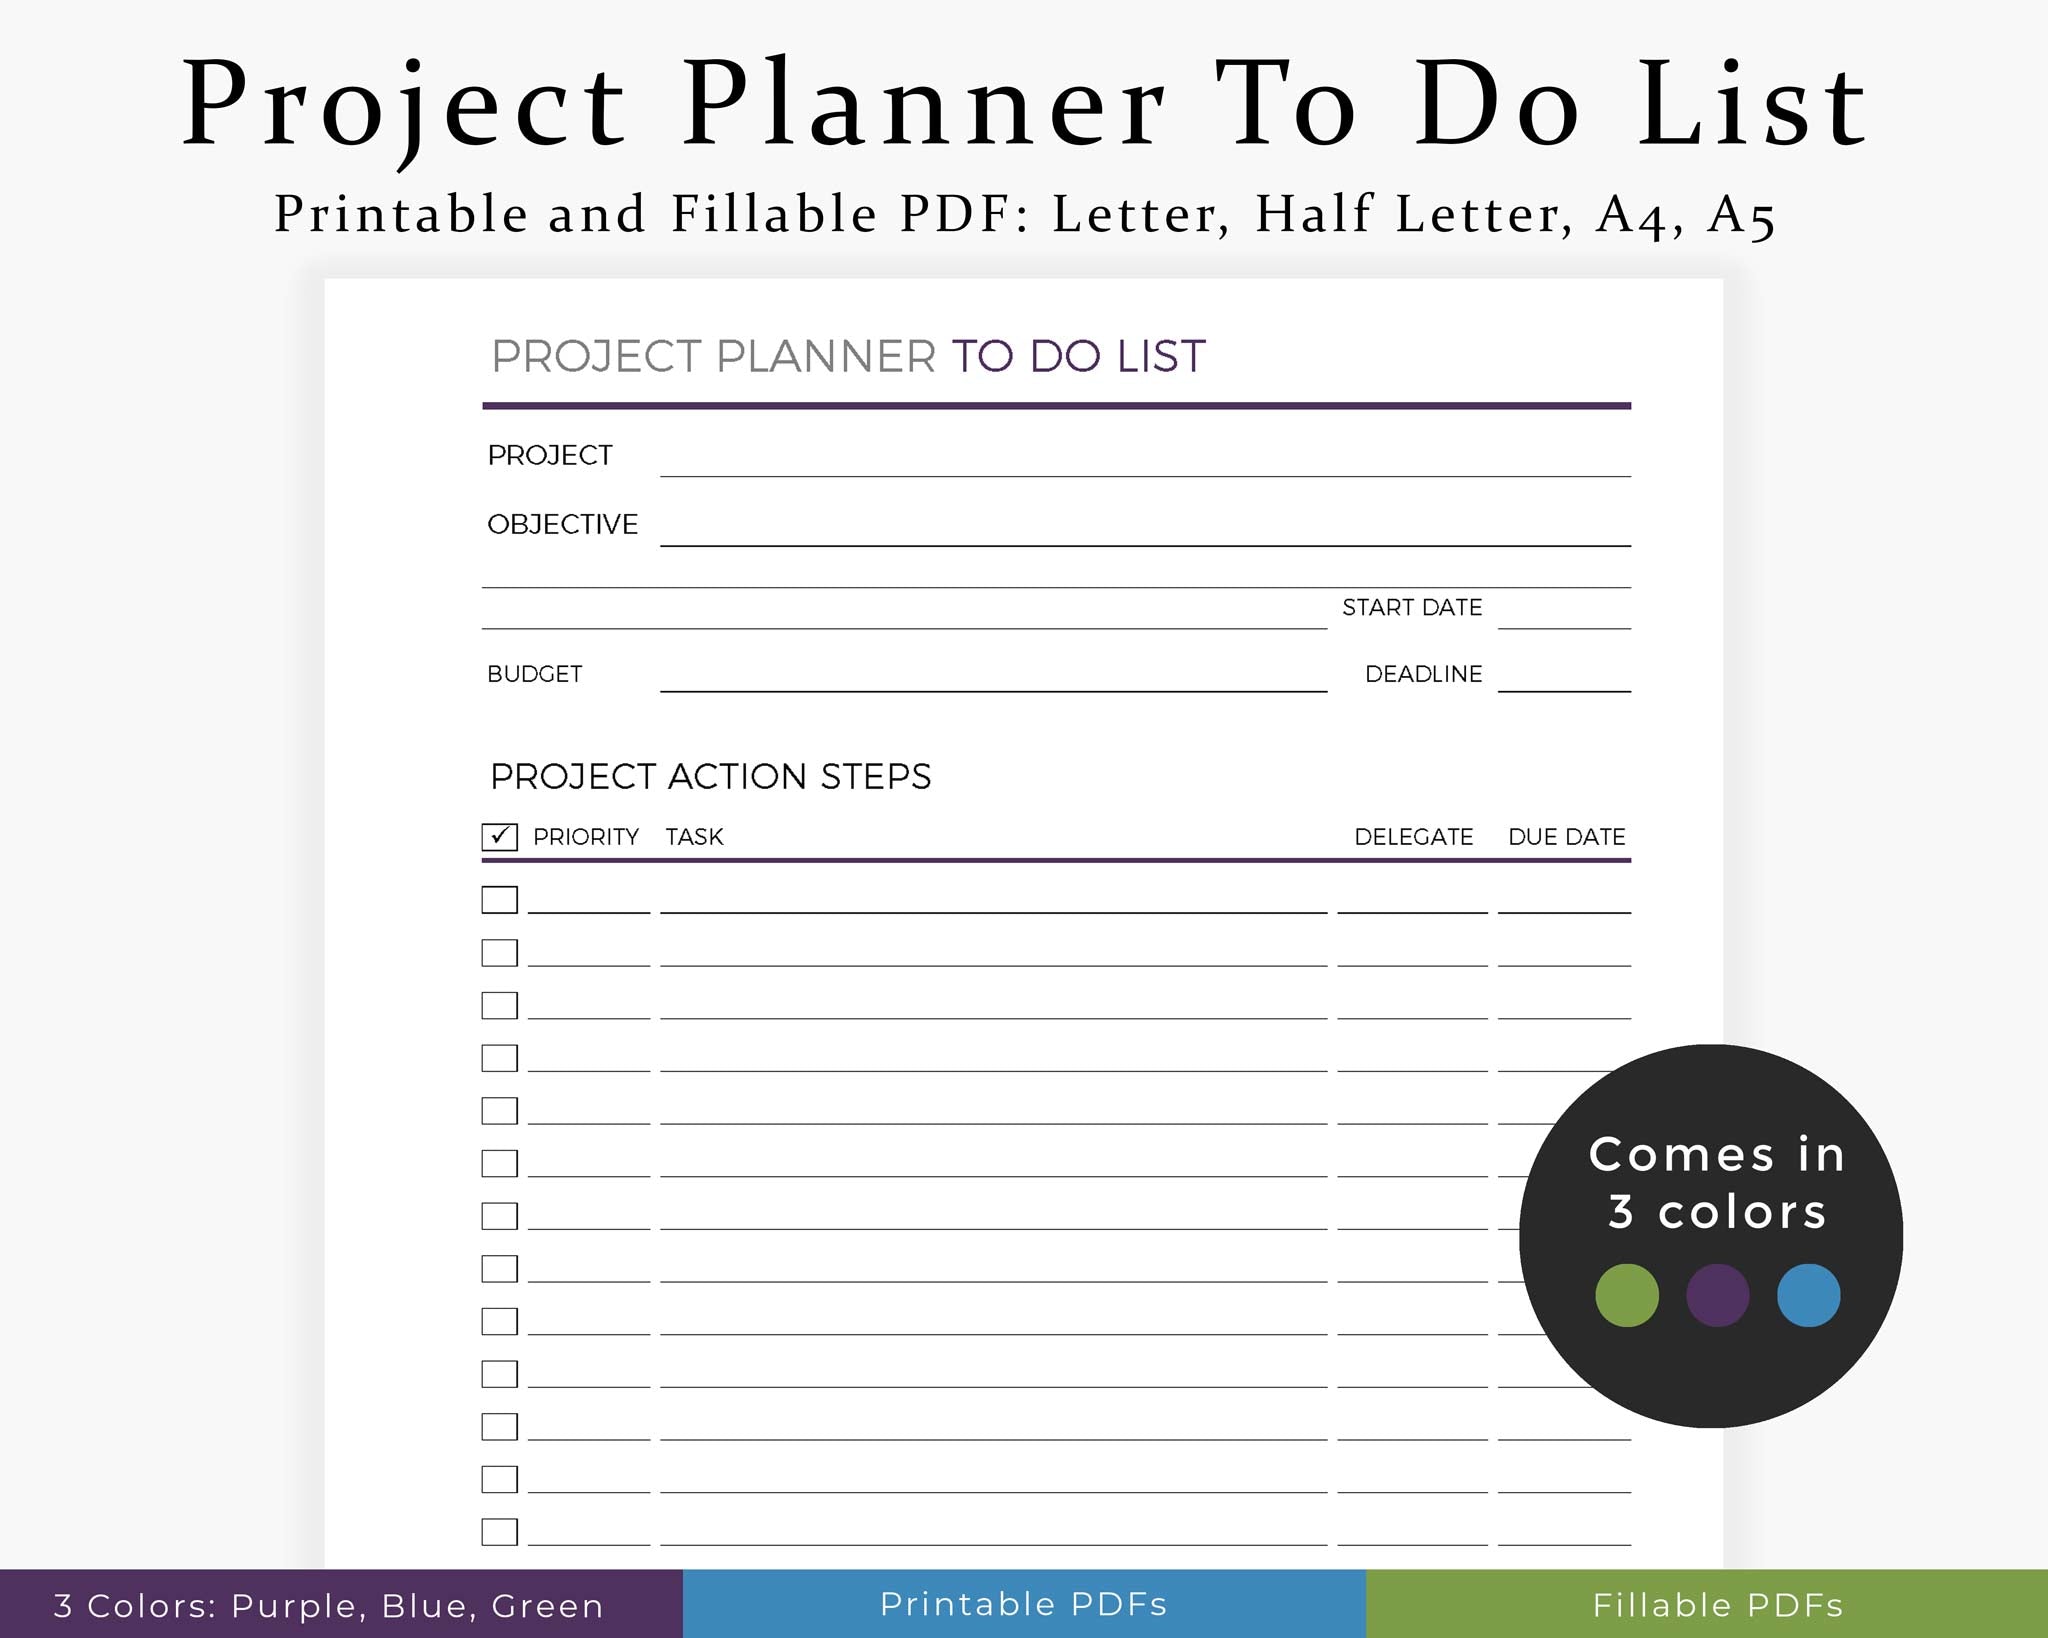 Project Planner To Do List Printable Planner – Thrive Planners